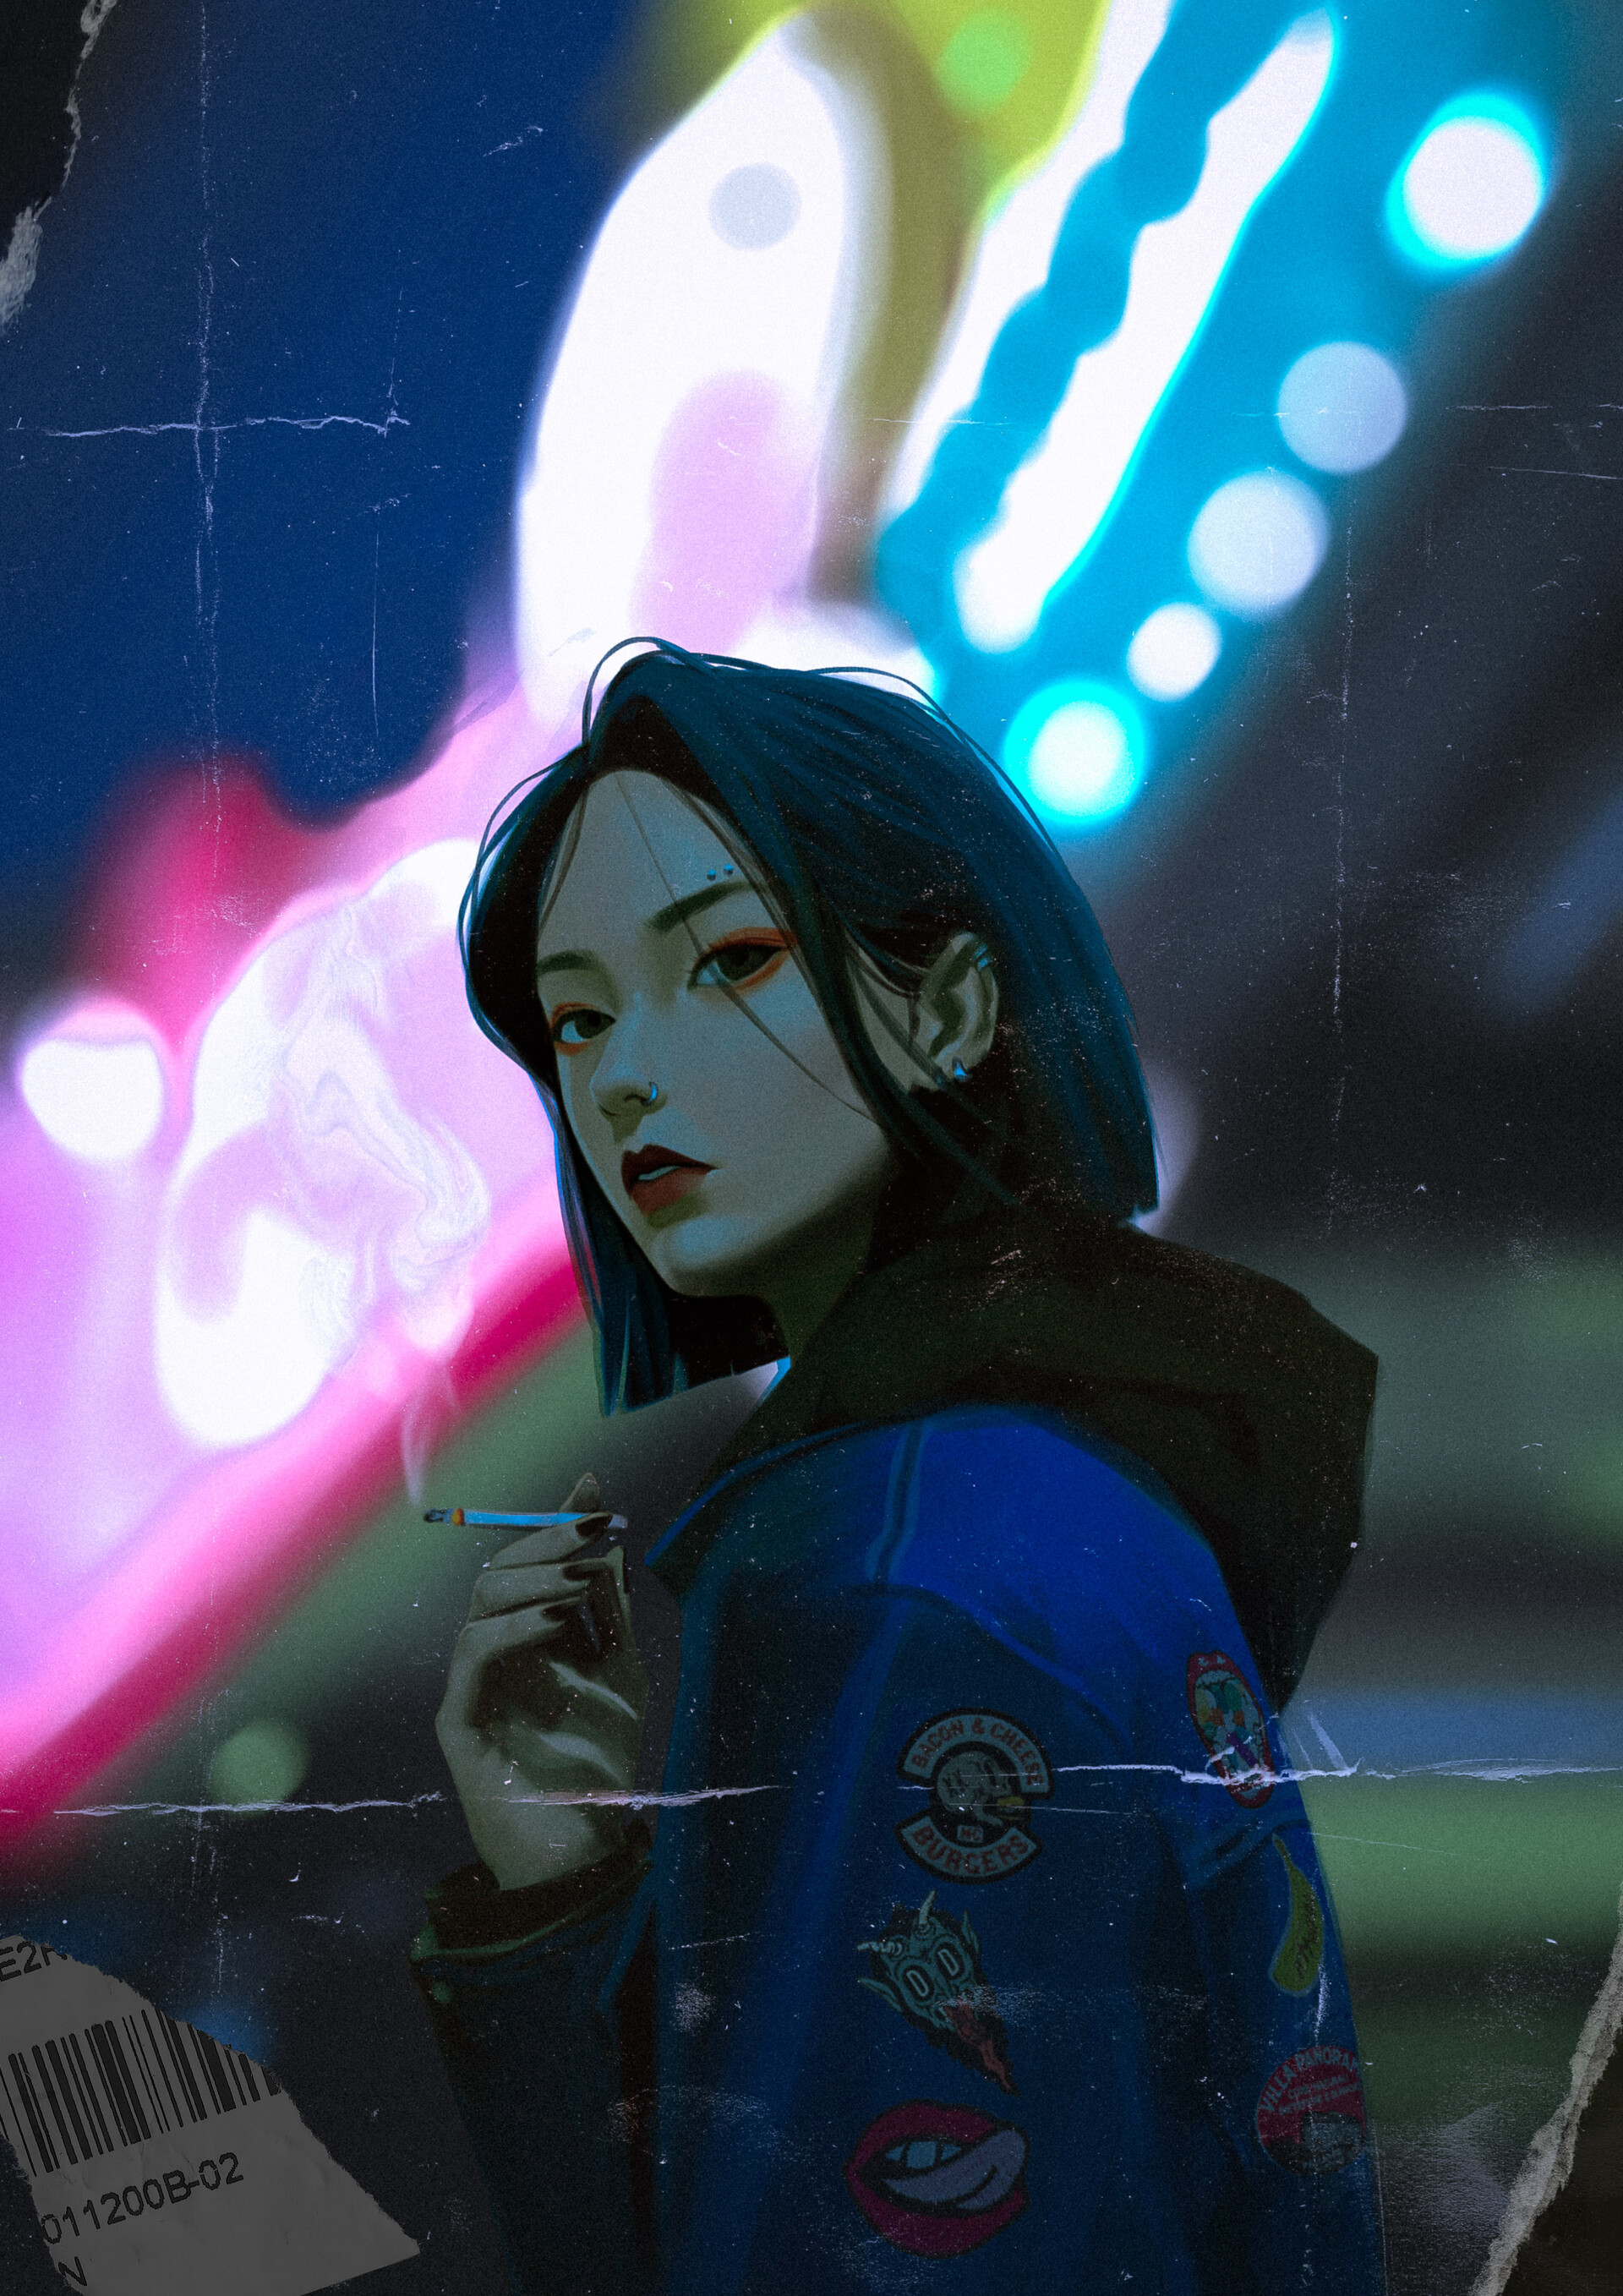 Smoking Anime Girl Japan' Poster by AestheticAlex | Displate